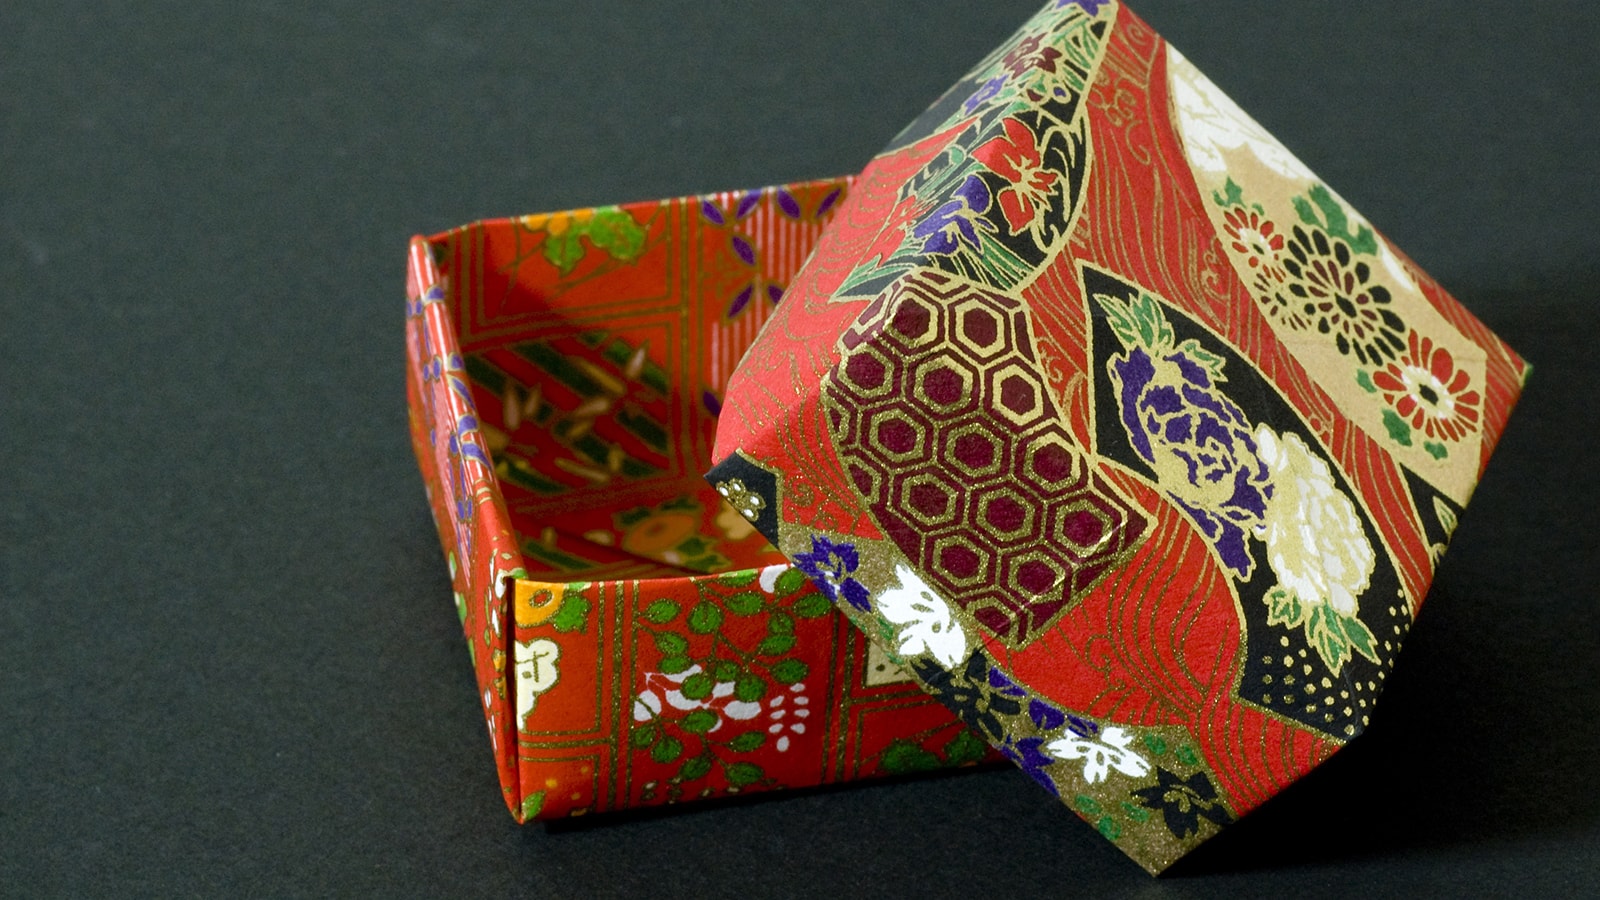 Small box made of red patterned paper